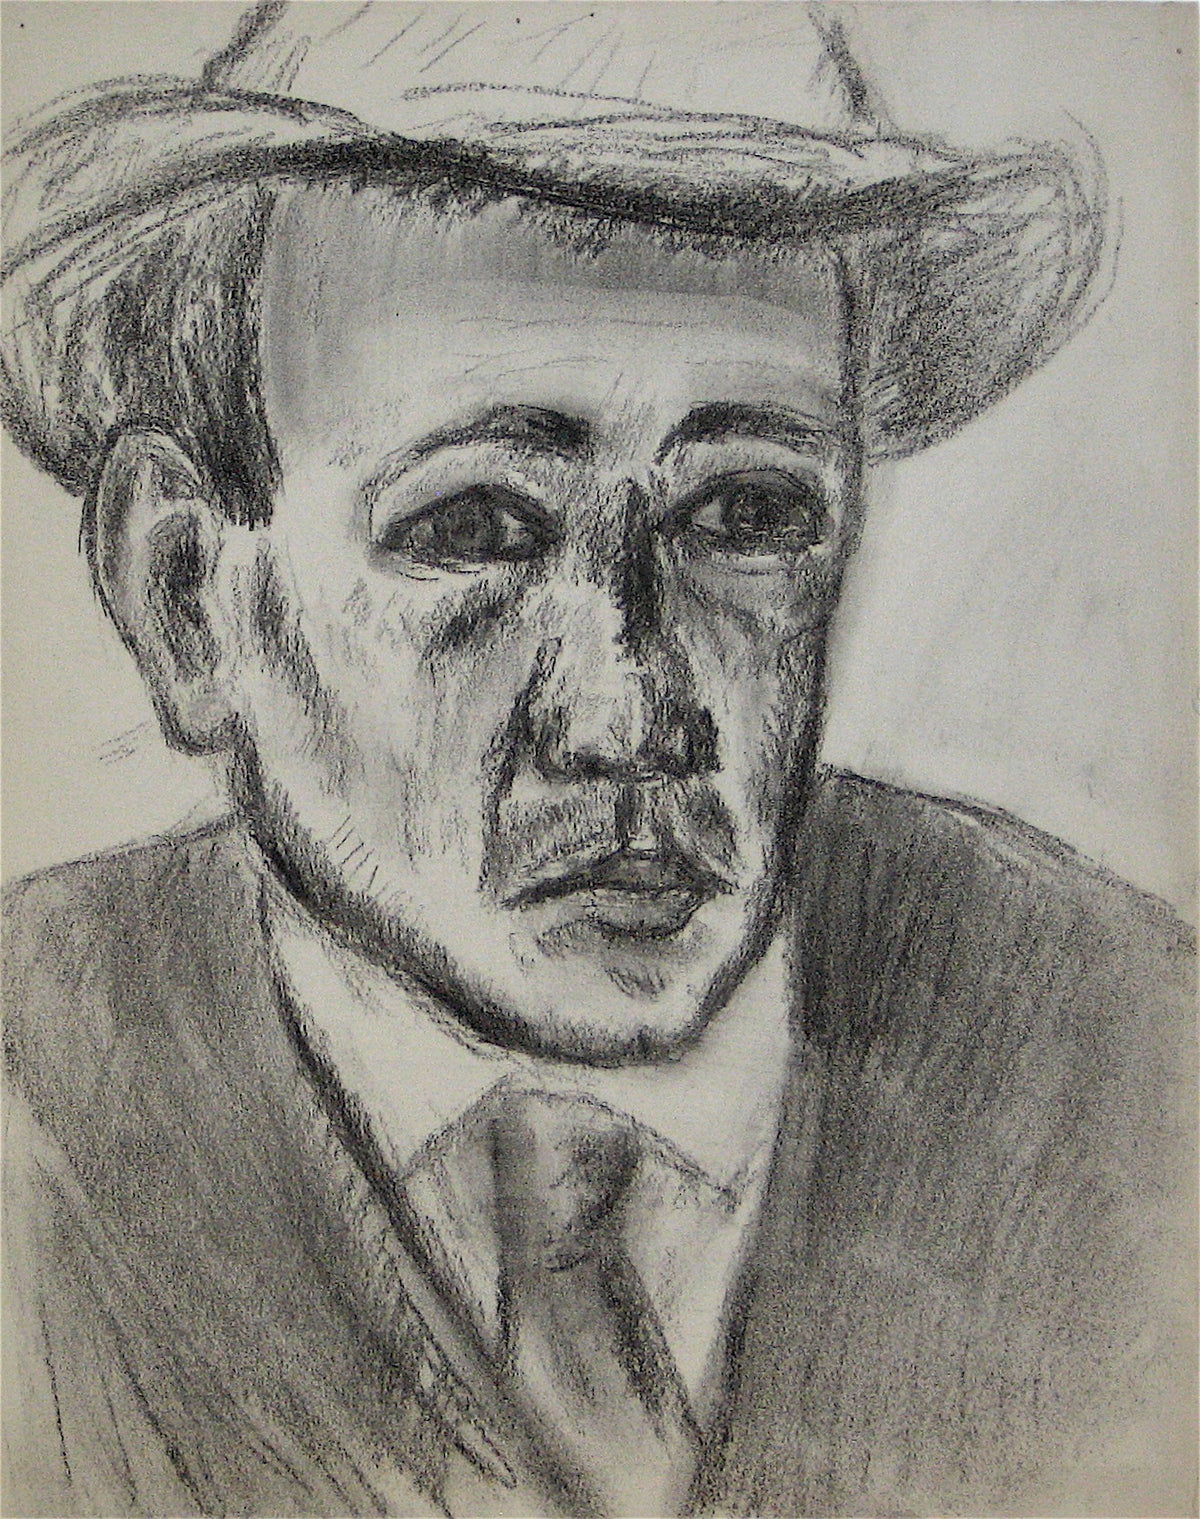 Self Portrait of the Artist&lt;br&gt;Early 20th Century Charcoal&lt;br&gt;&lt;br&gt;#11291